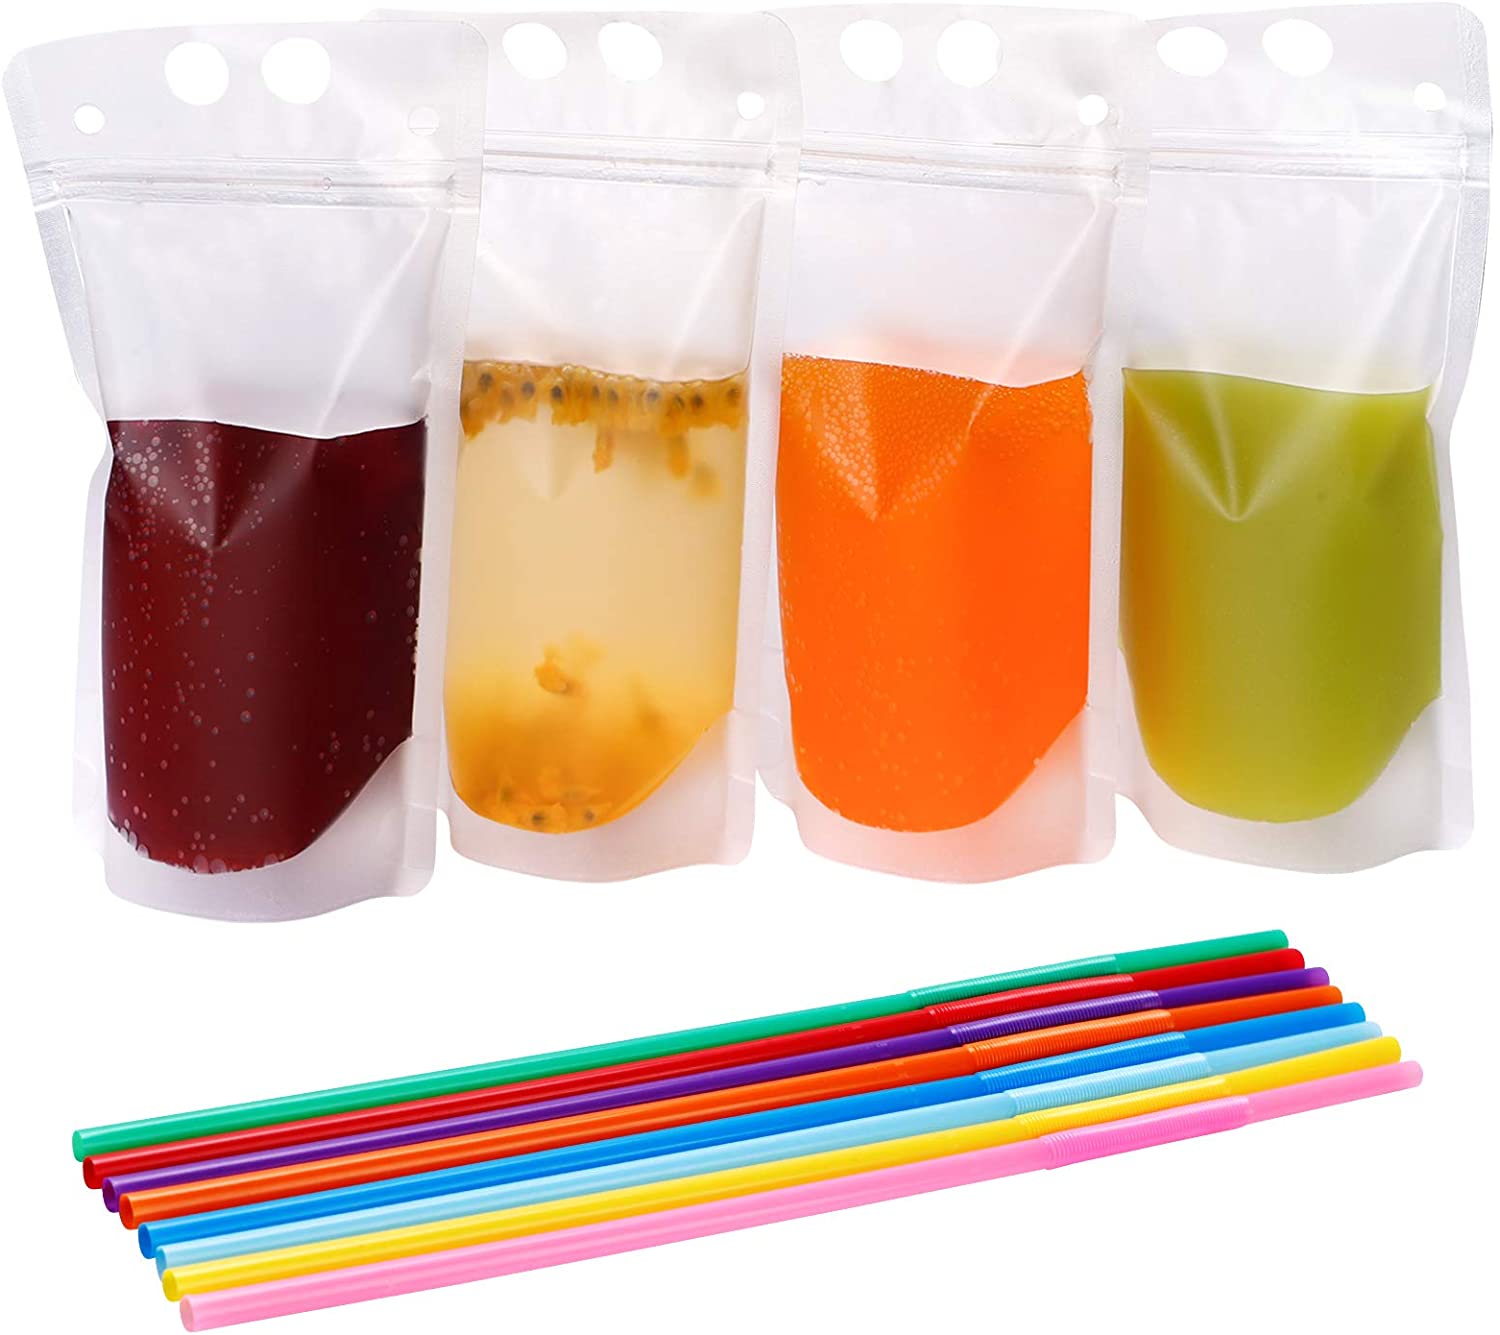 TOMNK 100pcs Clear Drink Pouches Bags Smoothie Bags Reclosable Zipper Heavy Duty Hand-held Translucent Stand-up Plastic Pouches Bags Drinking Bags 2.4 Inches Bottom Gusset with 100pcs Straws